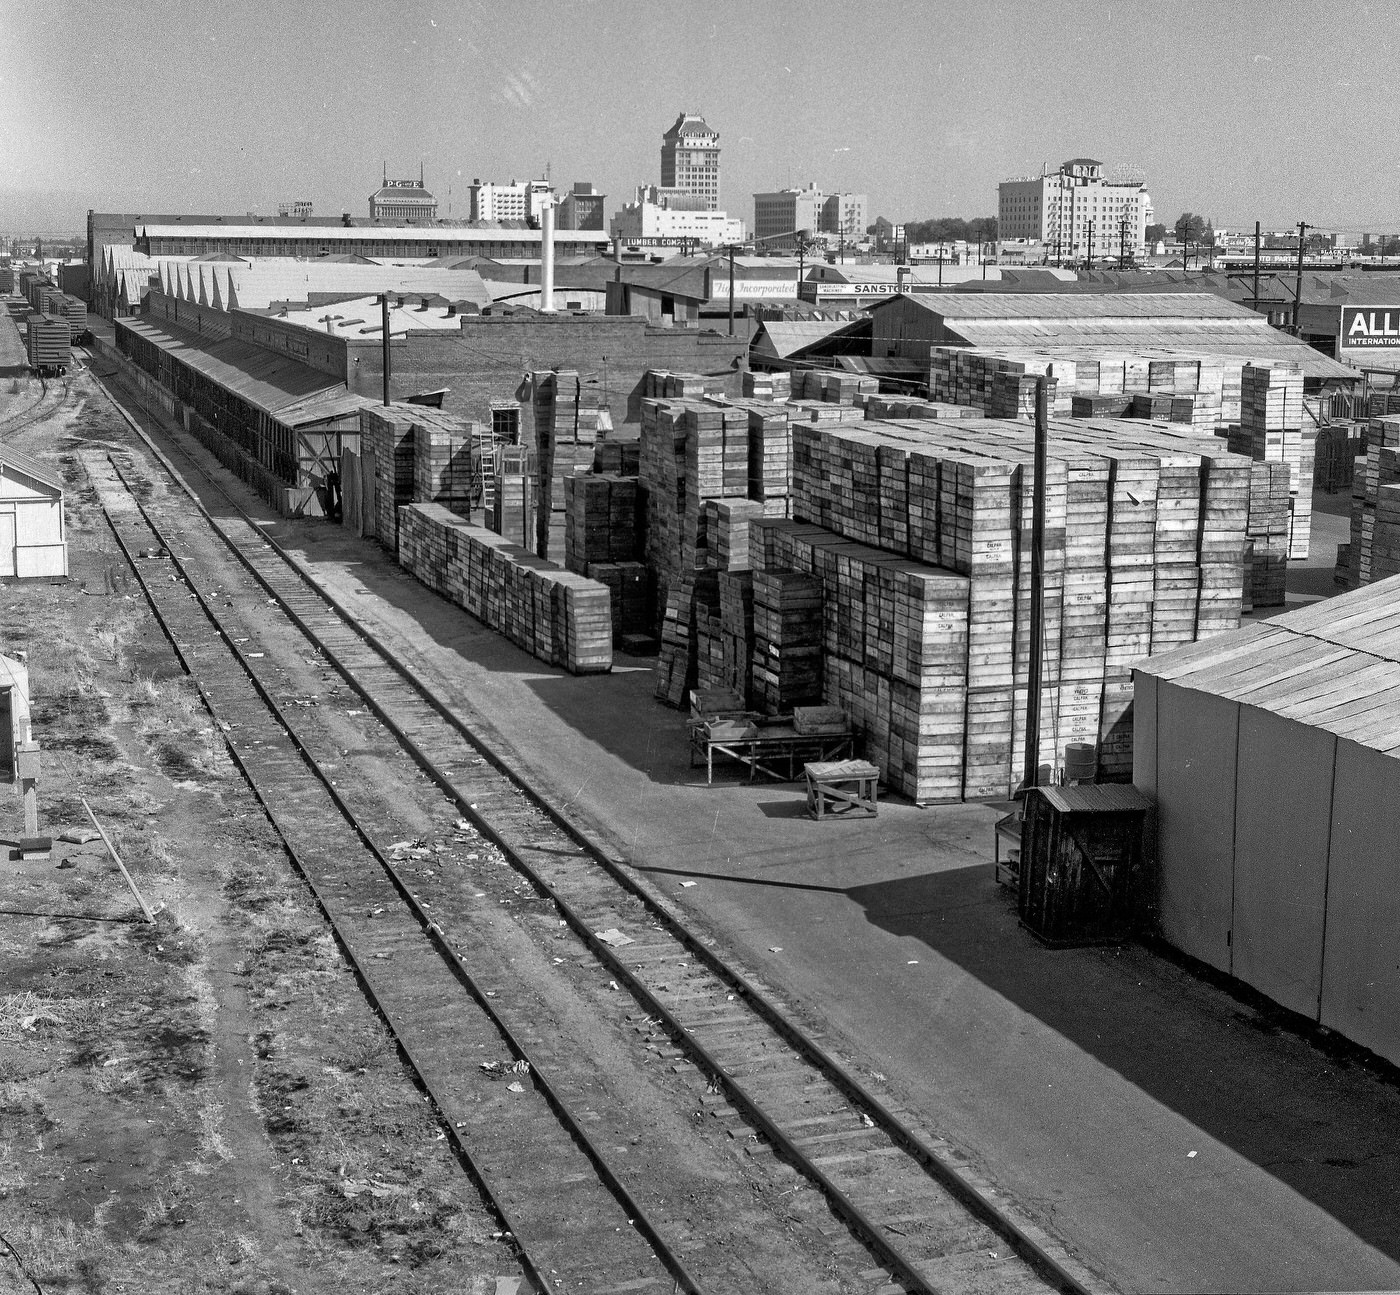 View north north west from the overpass over the Southern Pacific tracks SE of downtown Fresno, California.